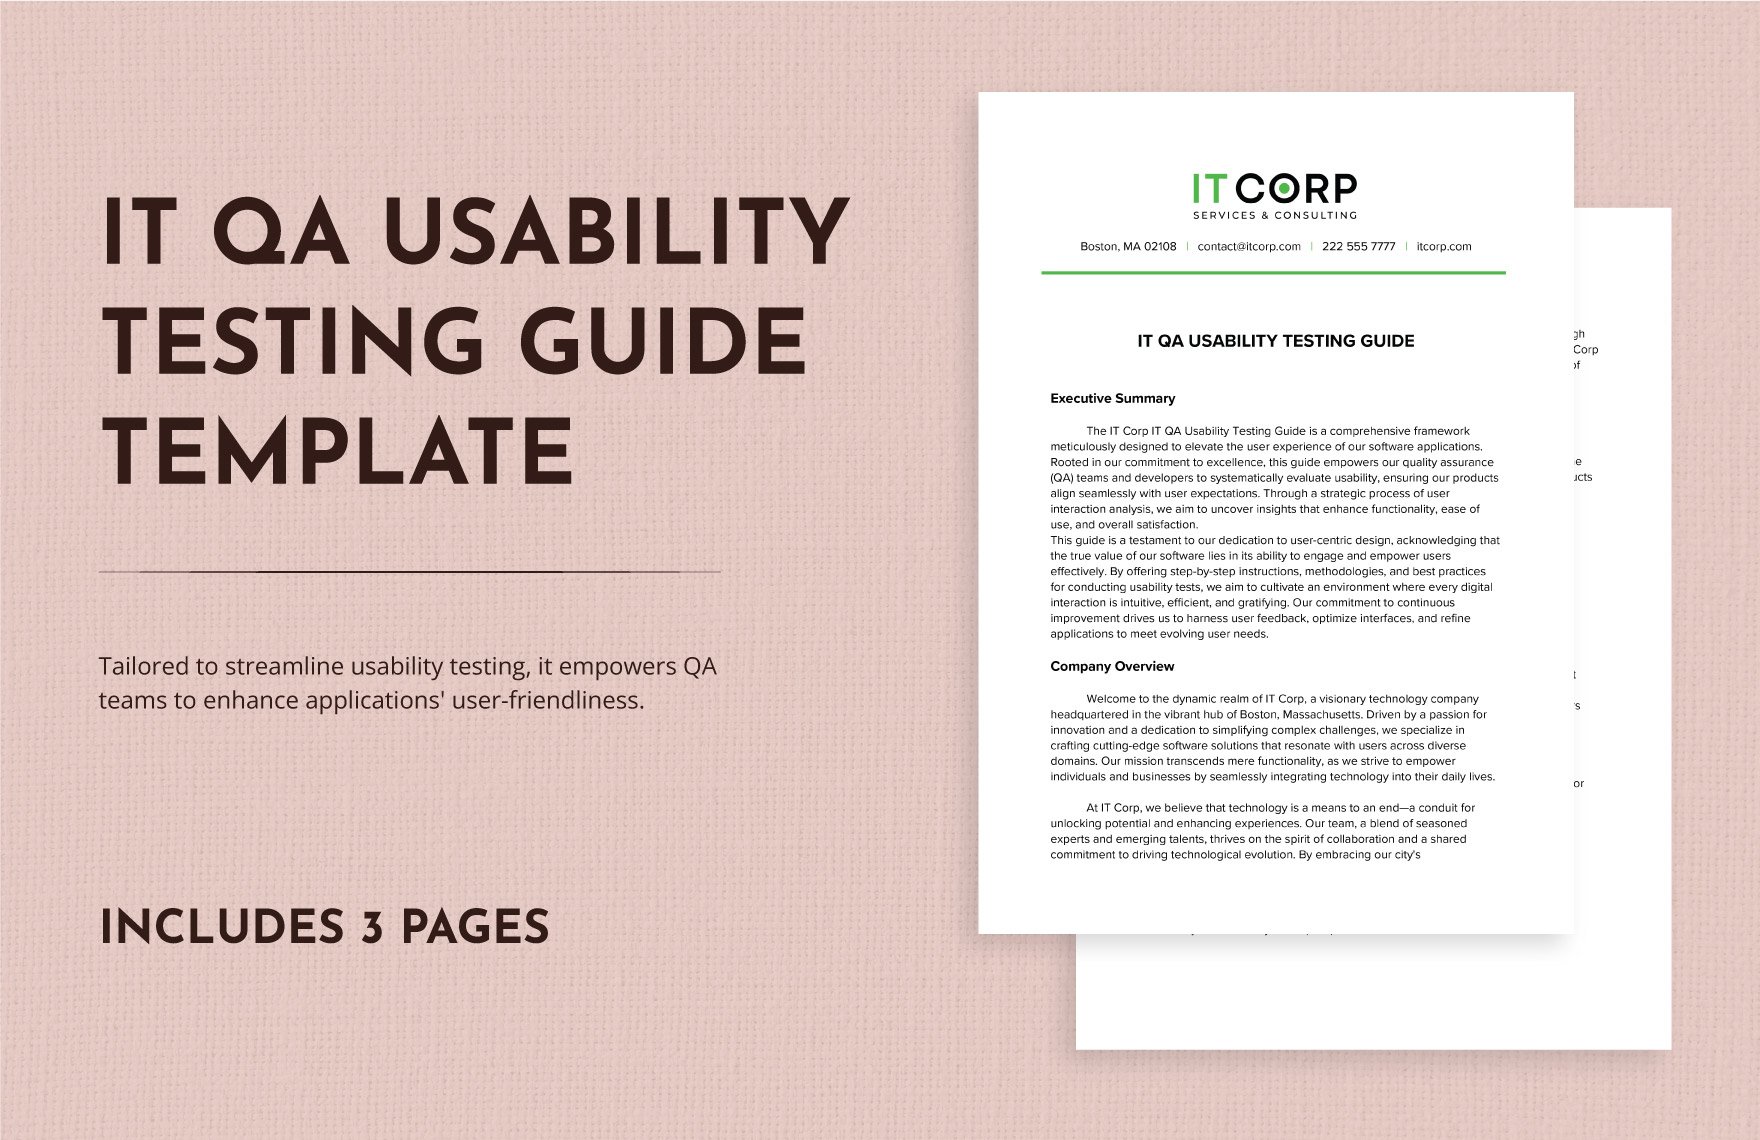 IT QA Usability Testing Guide Template